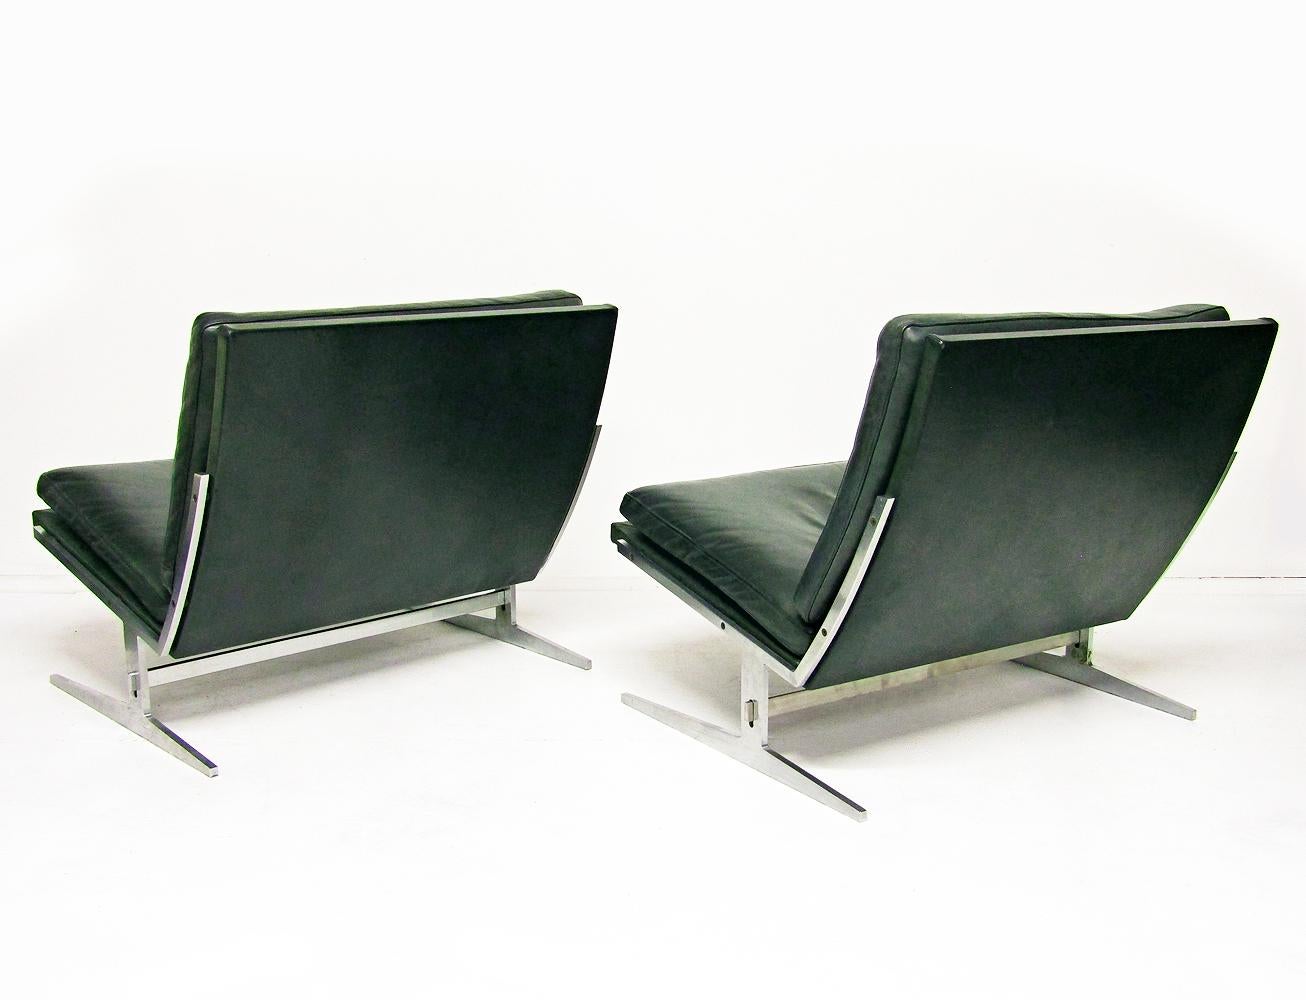 Two Danish BO-561 chairs in steel and leather by Preben Fabricius & Jorgen Kastholm for BO-EX.

Of 1960s vintage, these architectural design classics are robust and very comfortable. The leather covers are a rare deep turquoise color.

The BO-56